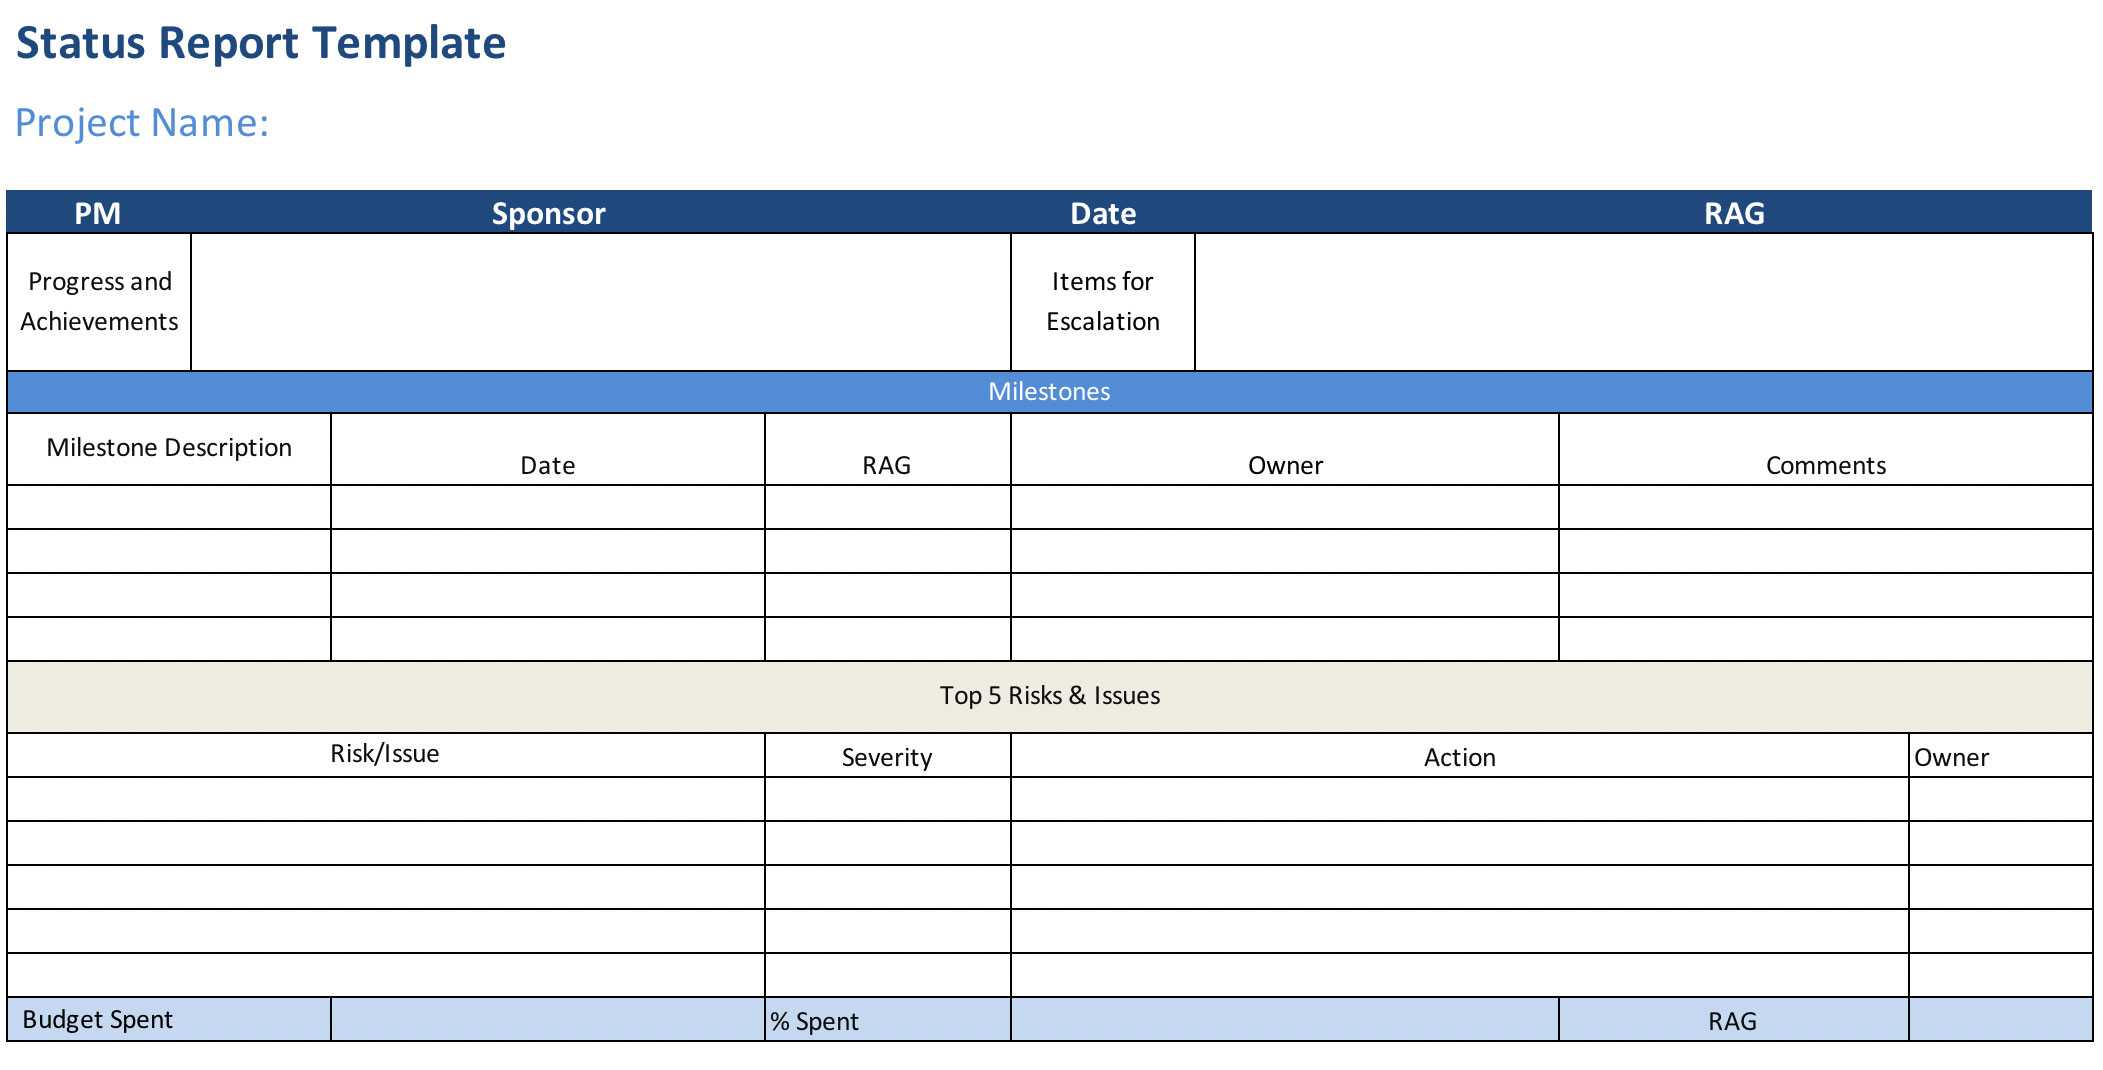 Project Status Report (Free Excel Template) – Projectmanager Throughout Project Portfolio Status Report Template